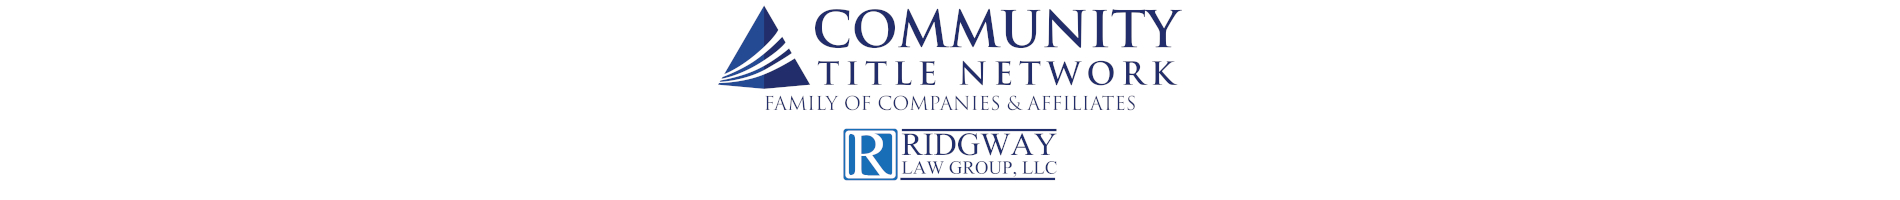 community closing network family of companies and affiliates logos